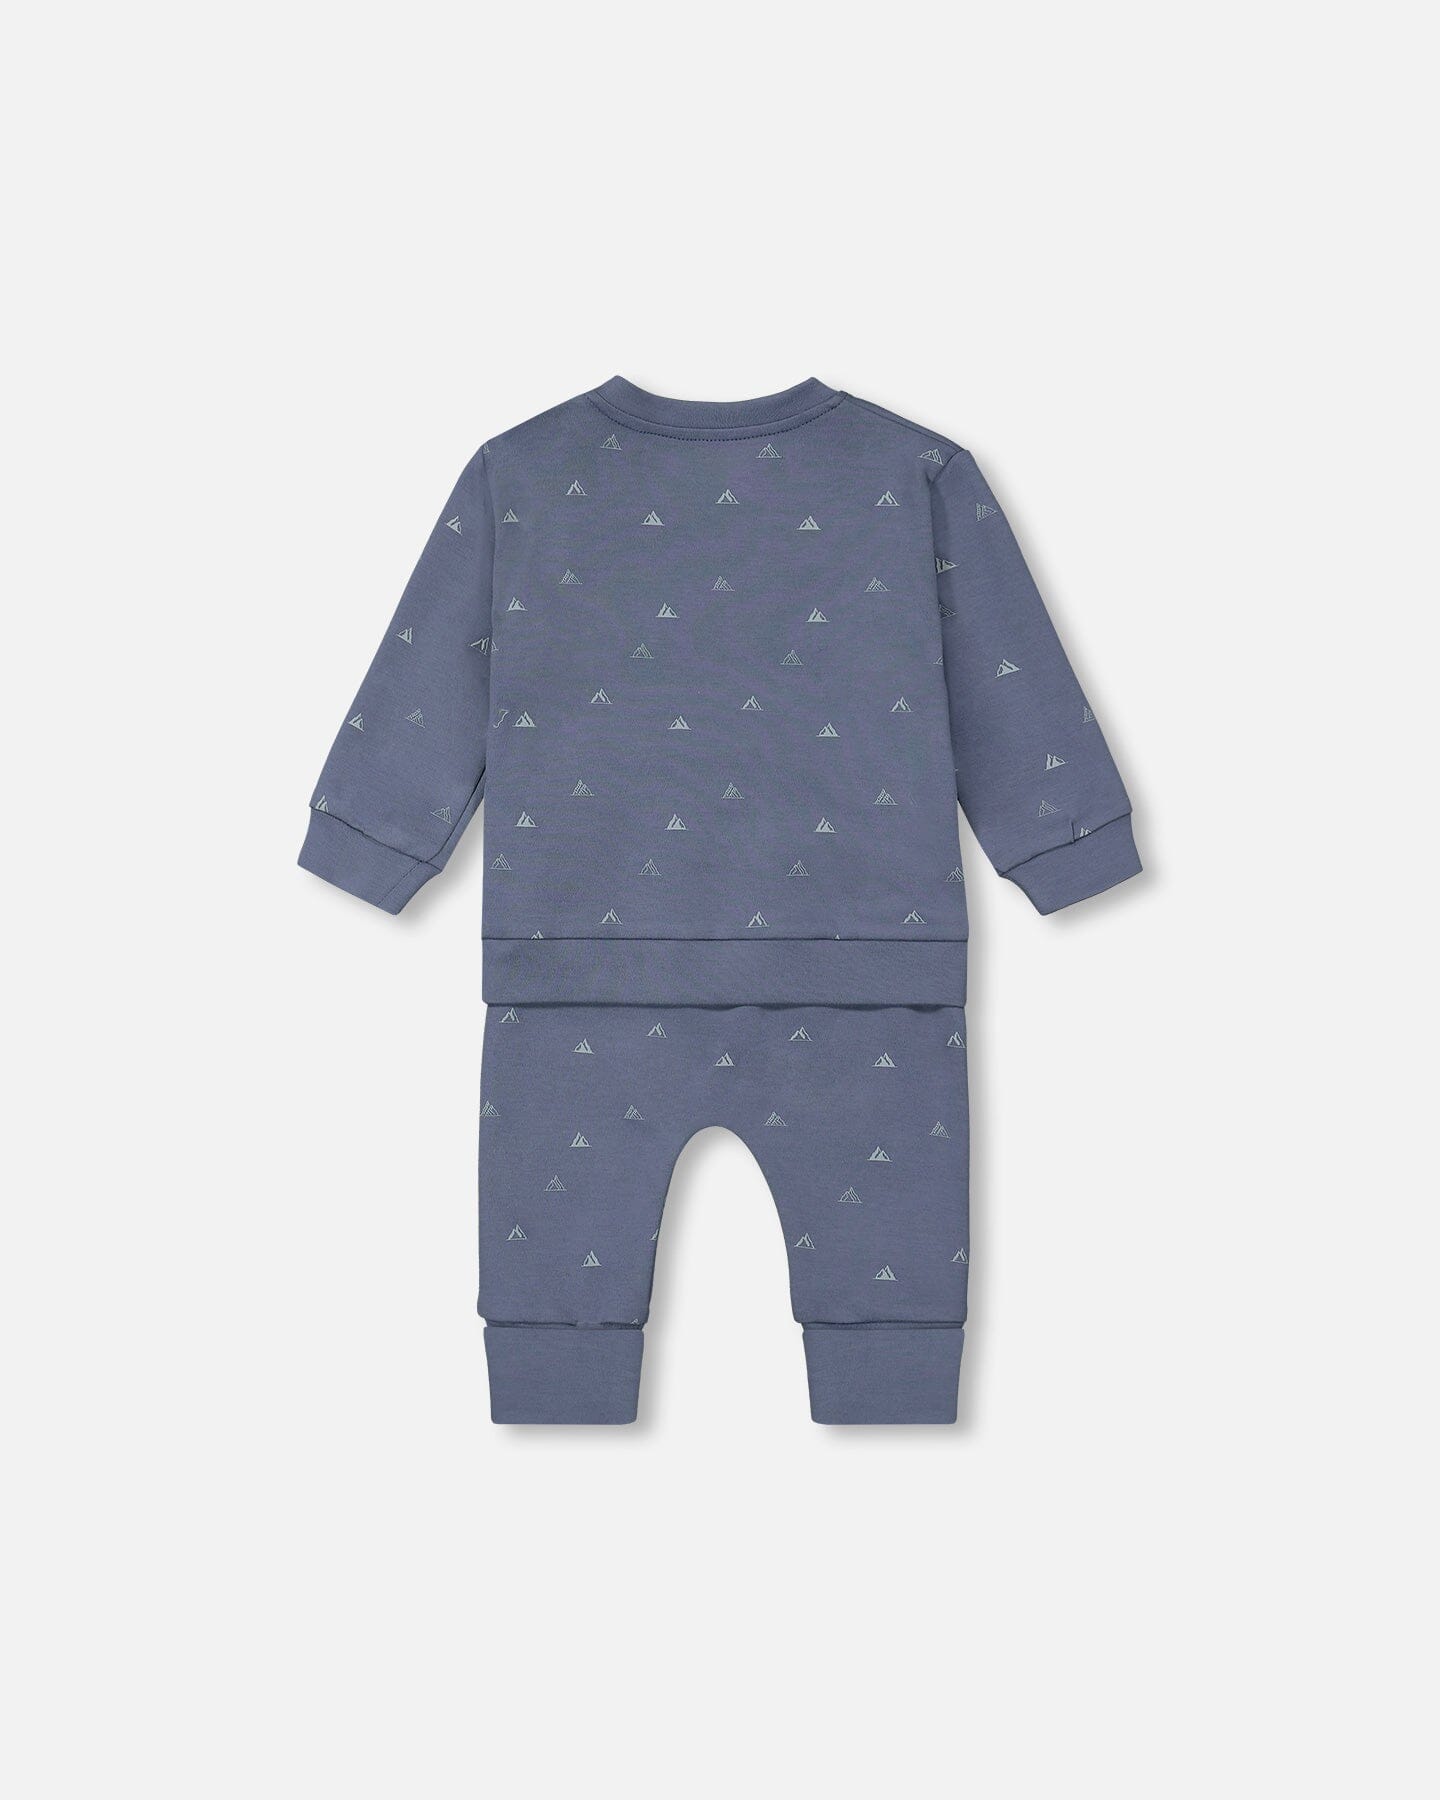 Organic Cotton Printed Top And Grow-With-Me Pants Set French Navy Little Mountains - F20D10_034